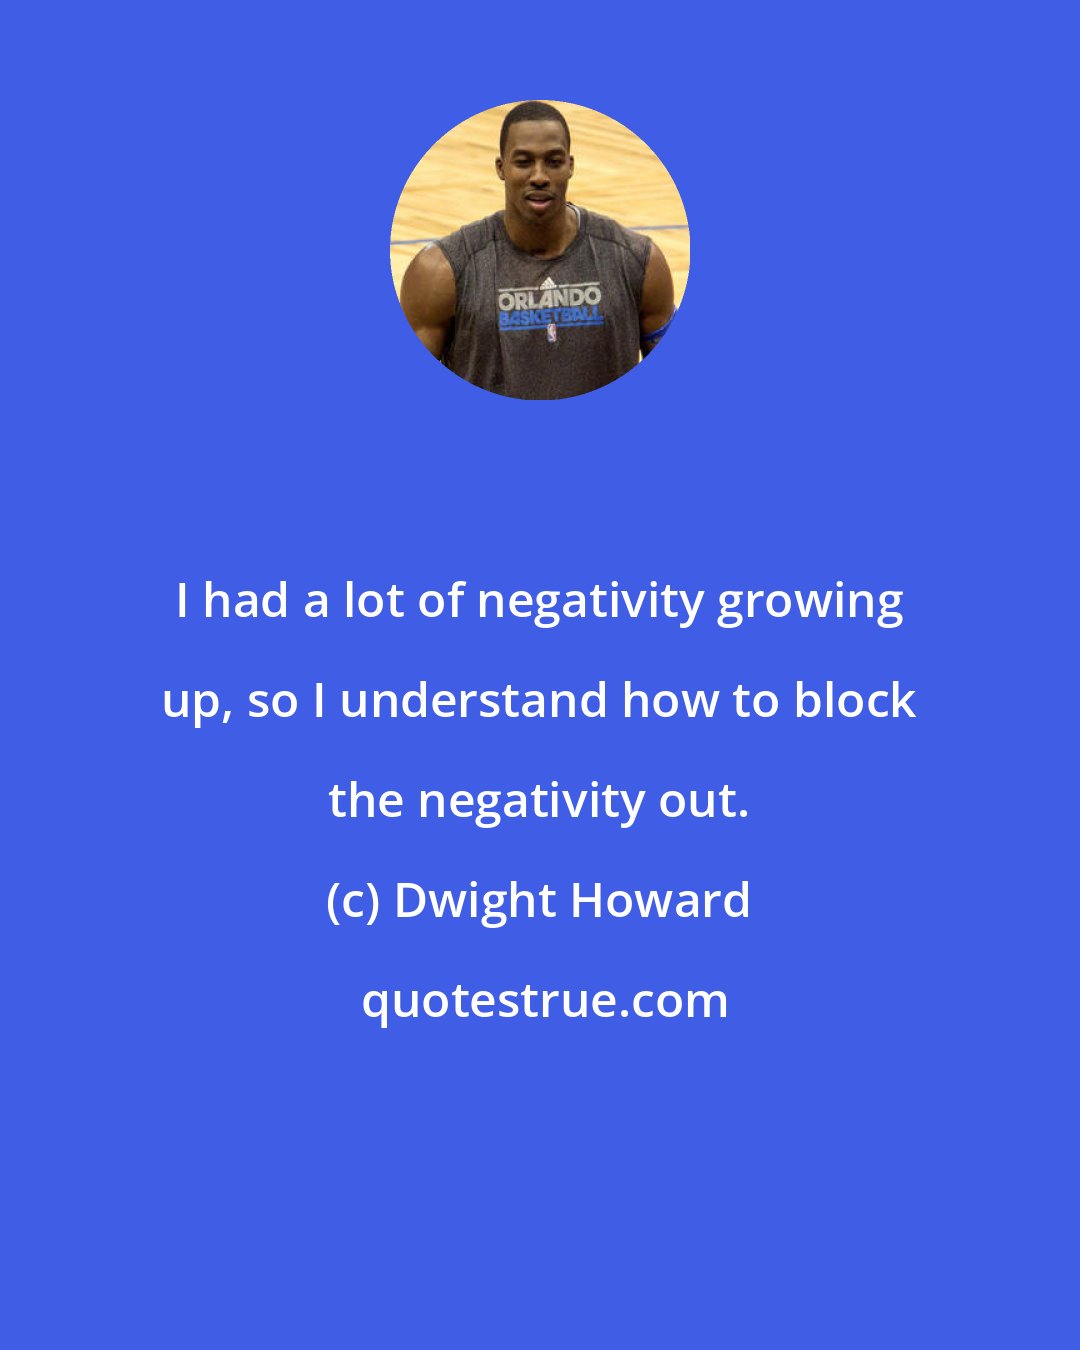 Dwight Howard: I had a lot of negativity growing up, so I understand how to block the negativity out.